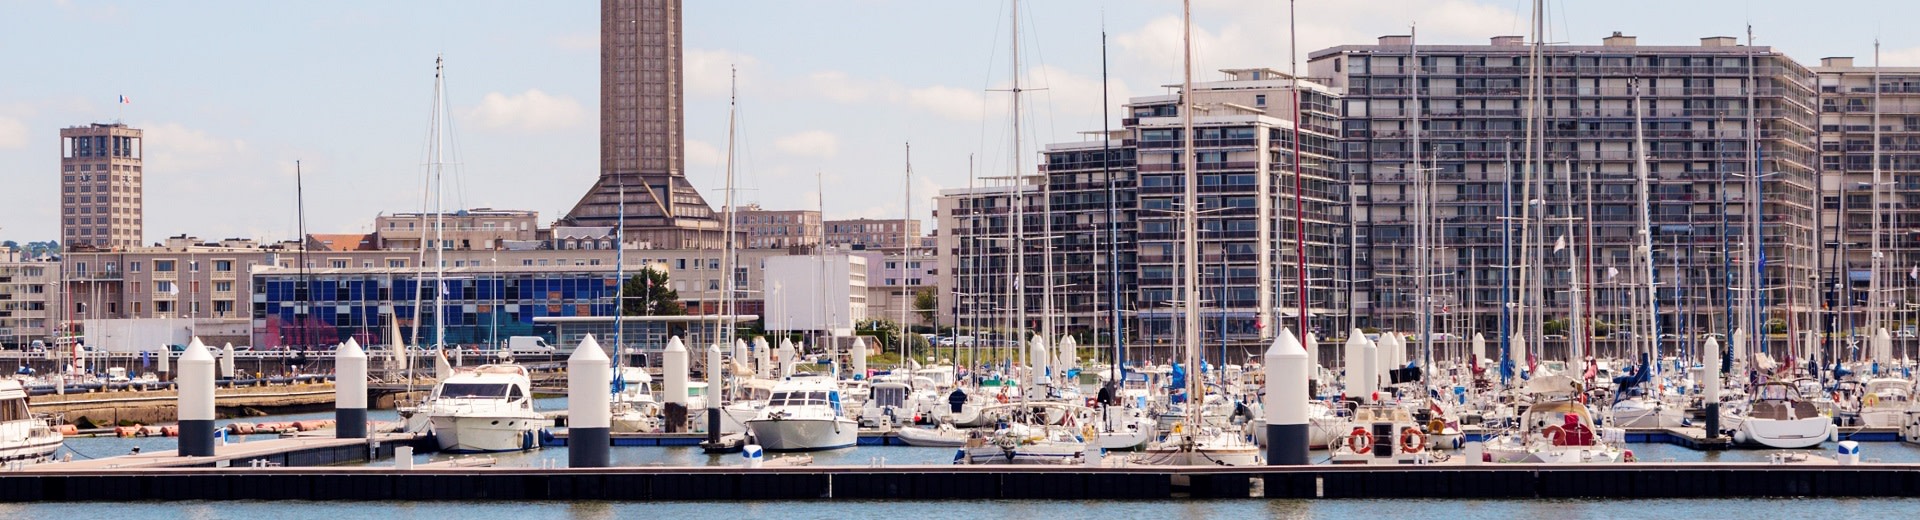 A picture of Le Havre with the masts of yachts and the tower of Saint Joseph's Church